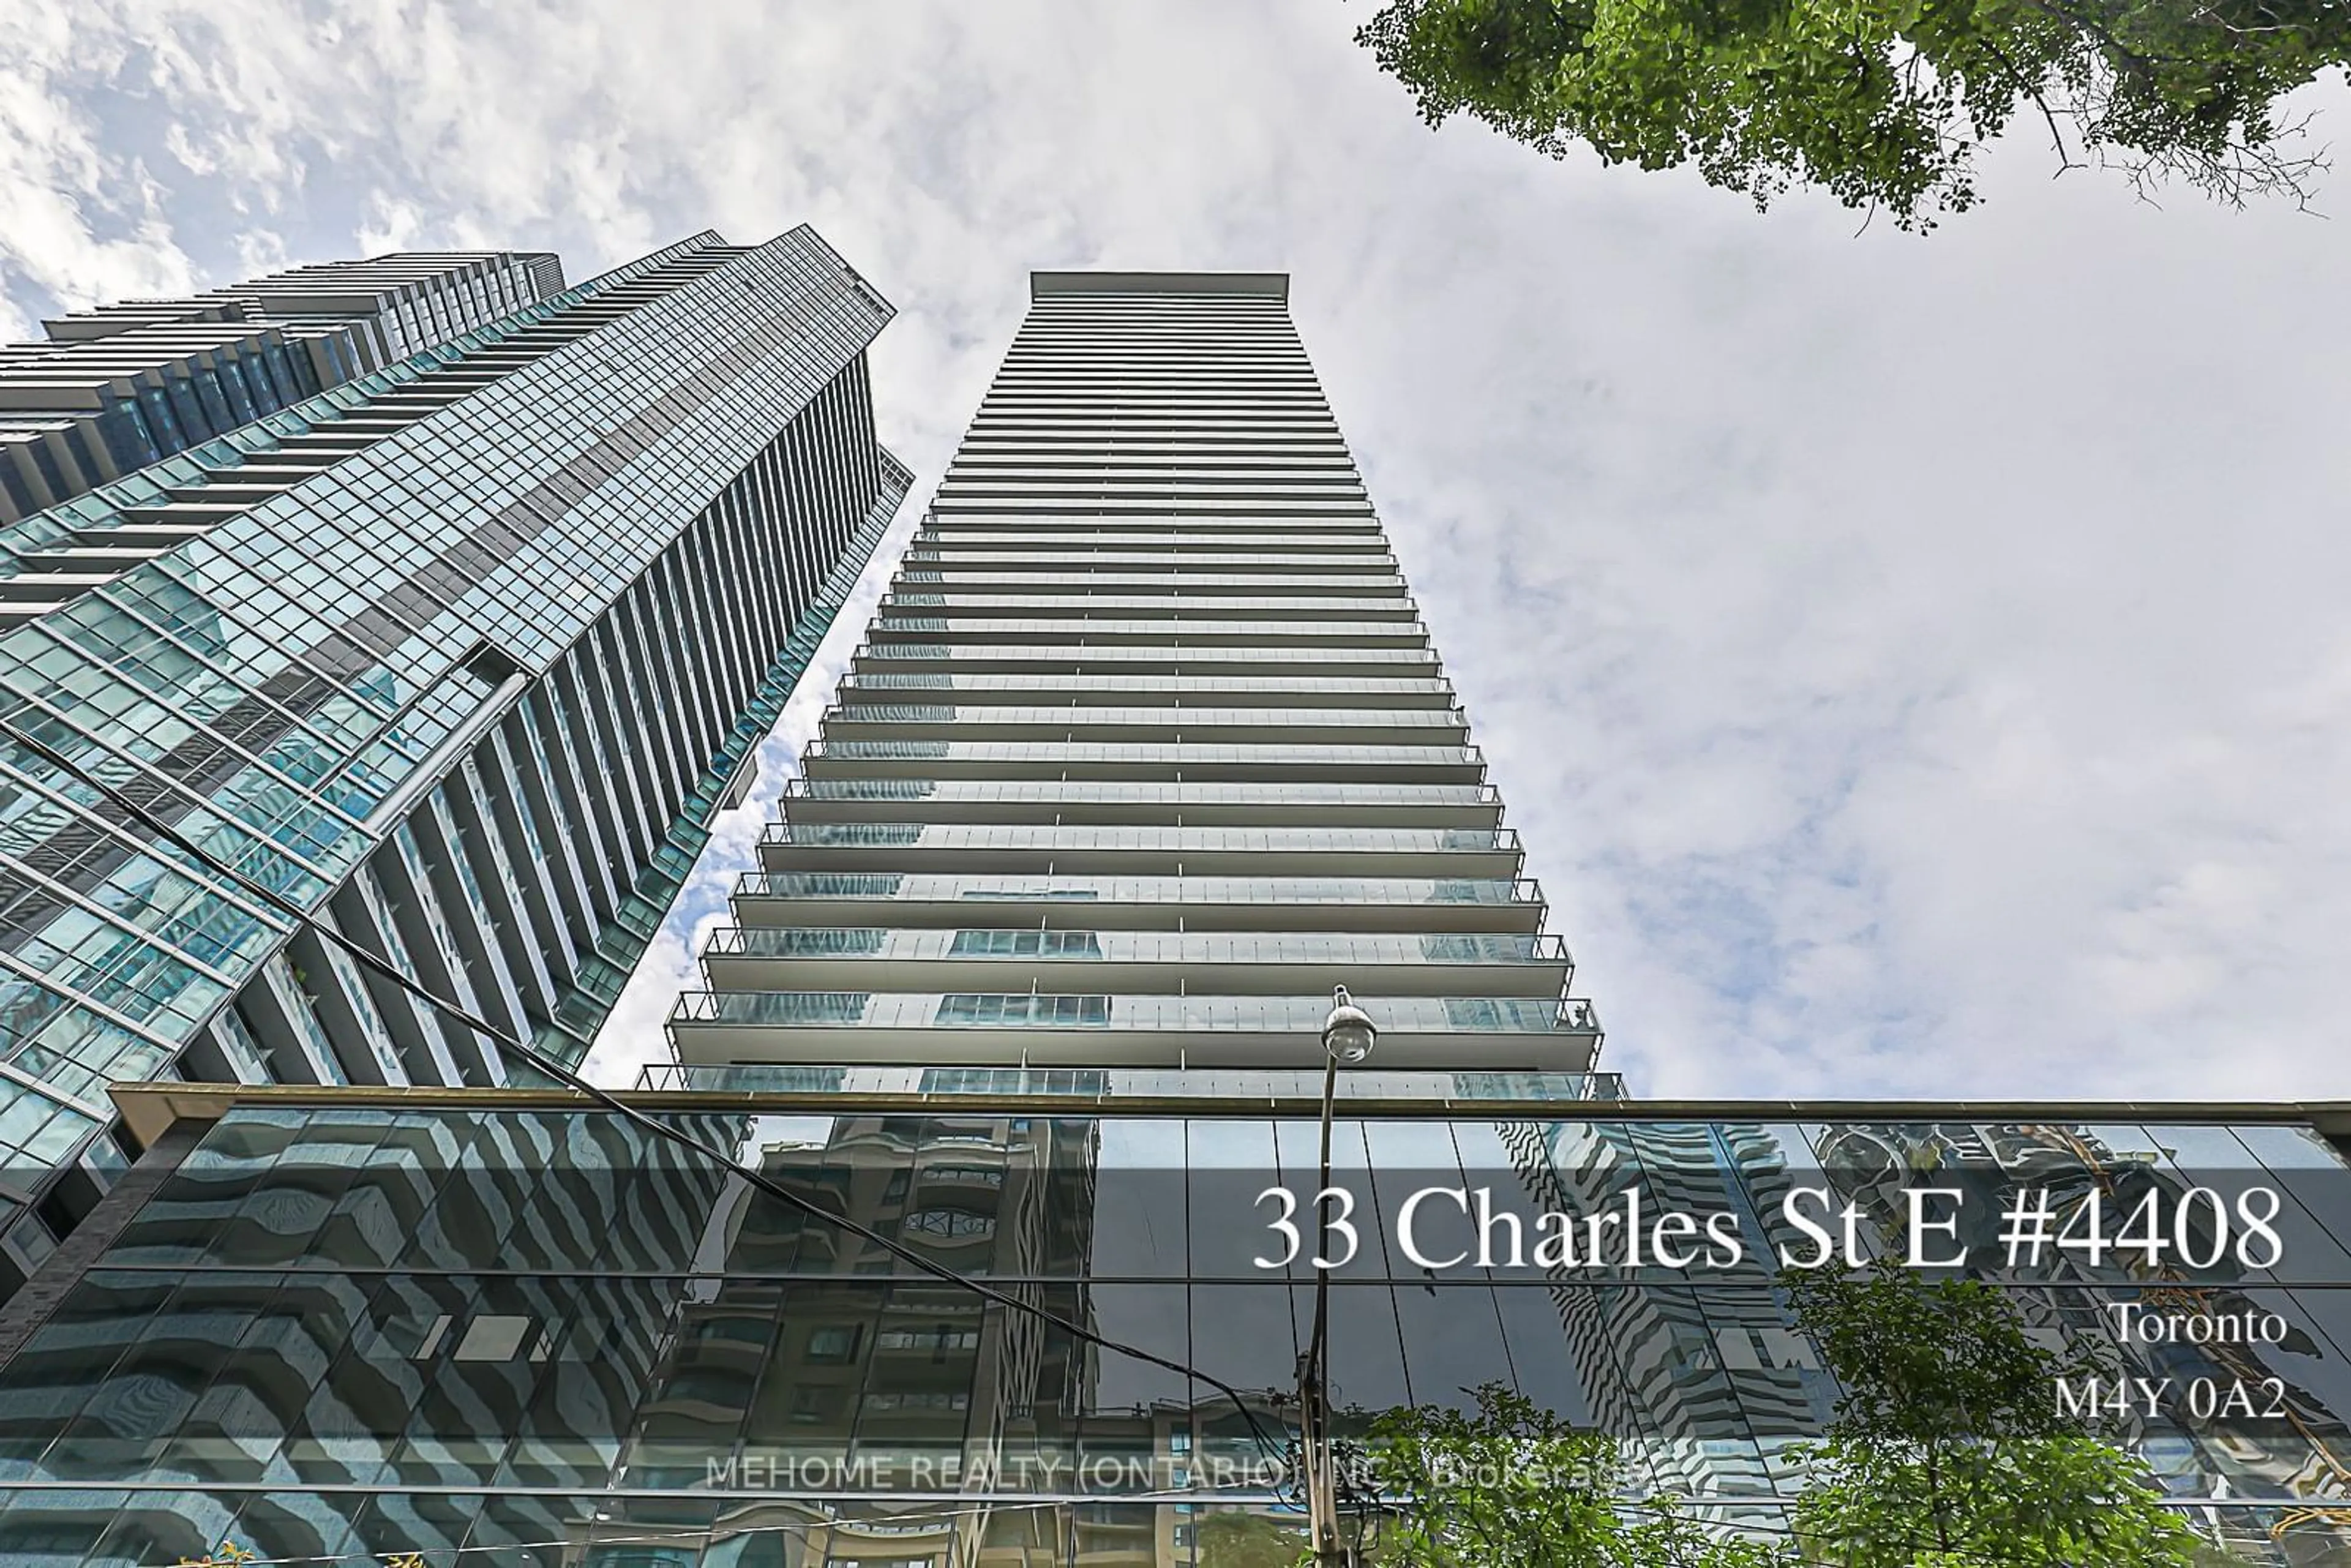 Street view for 33 Charles St #4408, Toronto Ontario M4Y 0A2